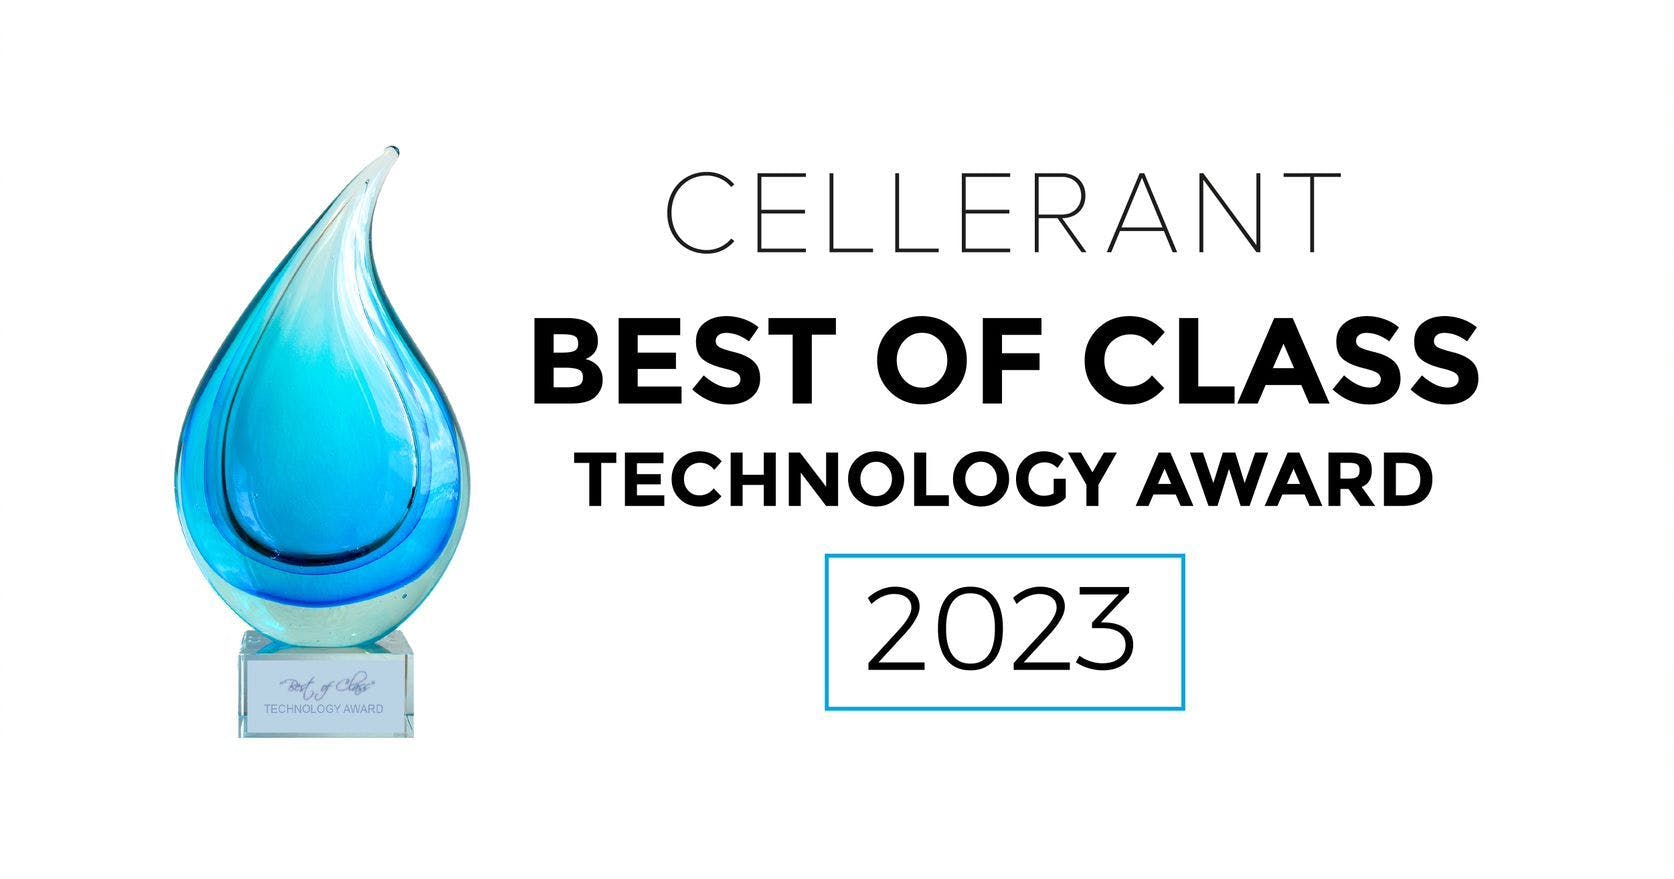 A Class Above: Presenting the 2023 Cellerant Best of Class Technology Awards | Image © Cellerant Consulting